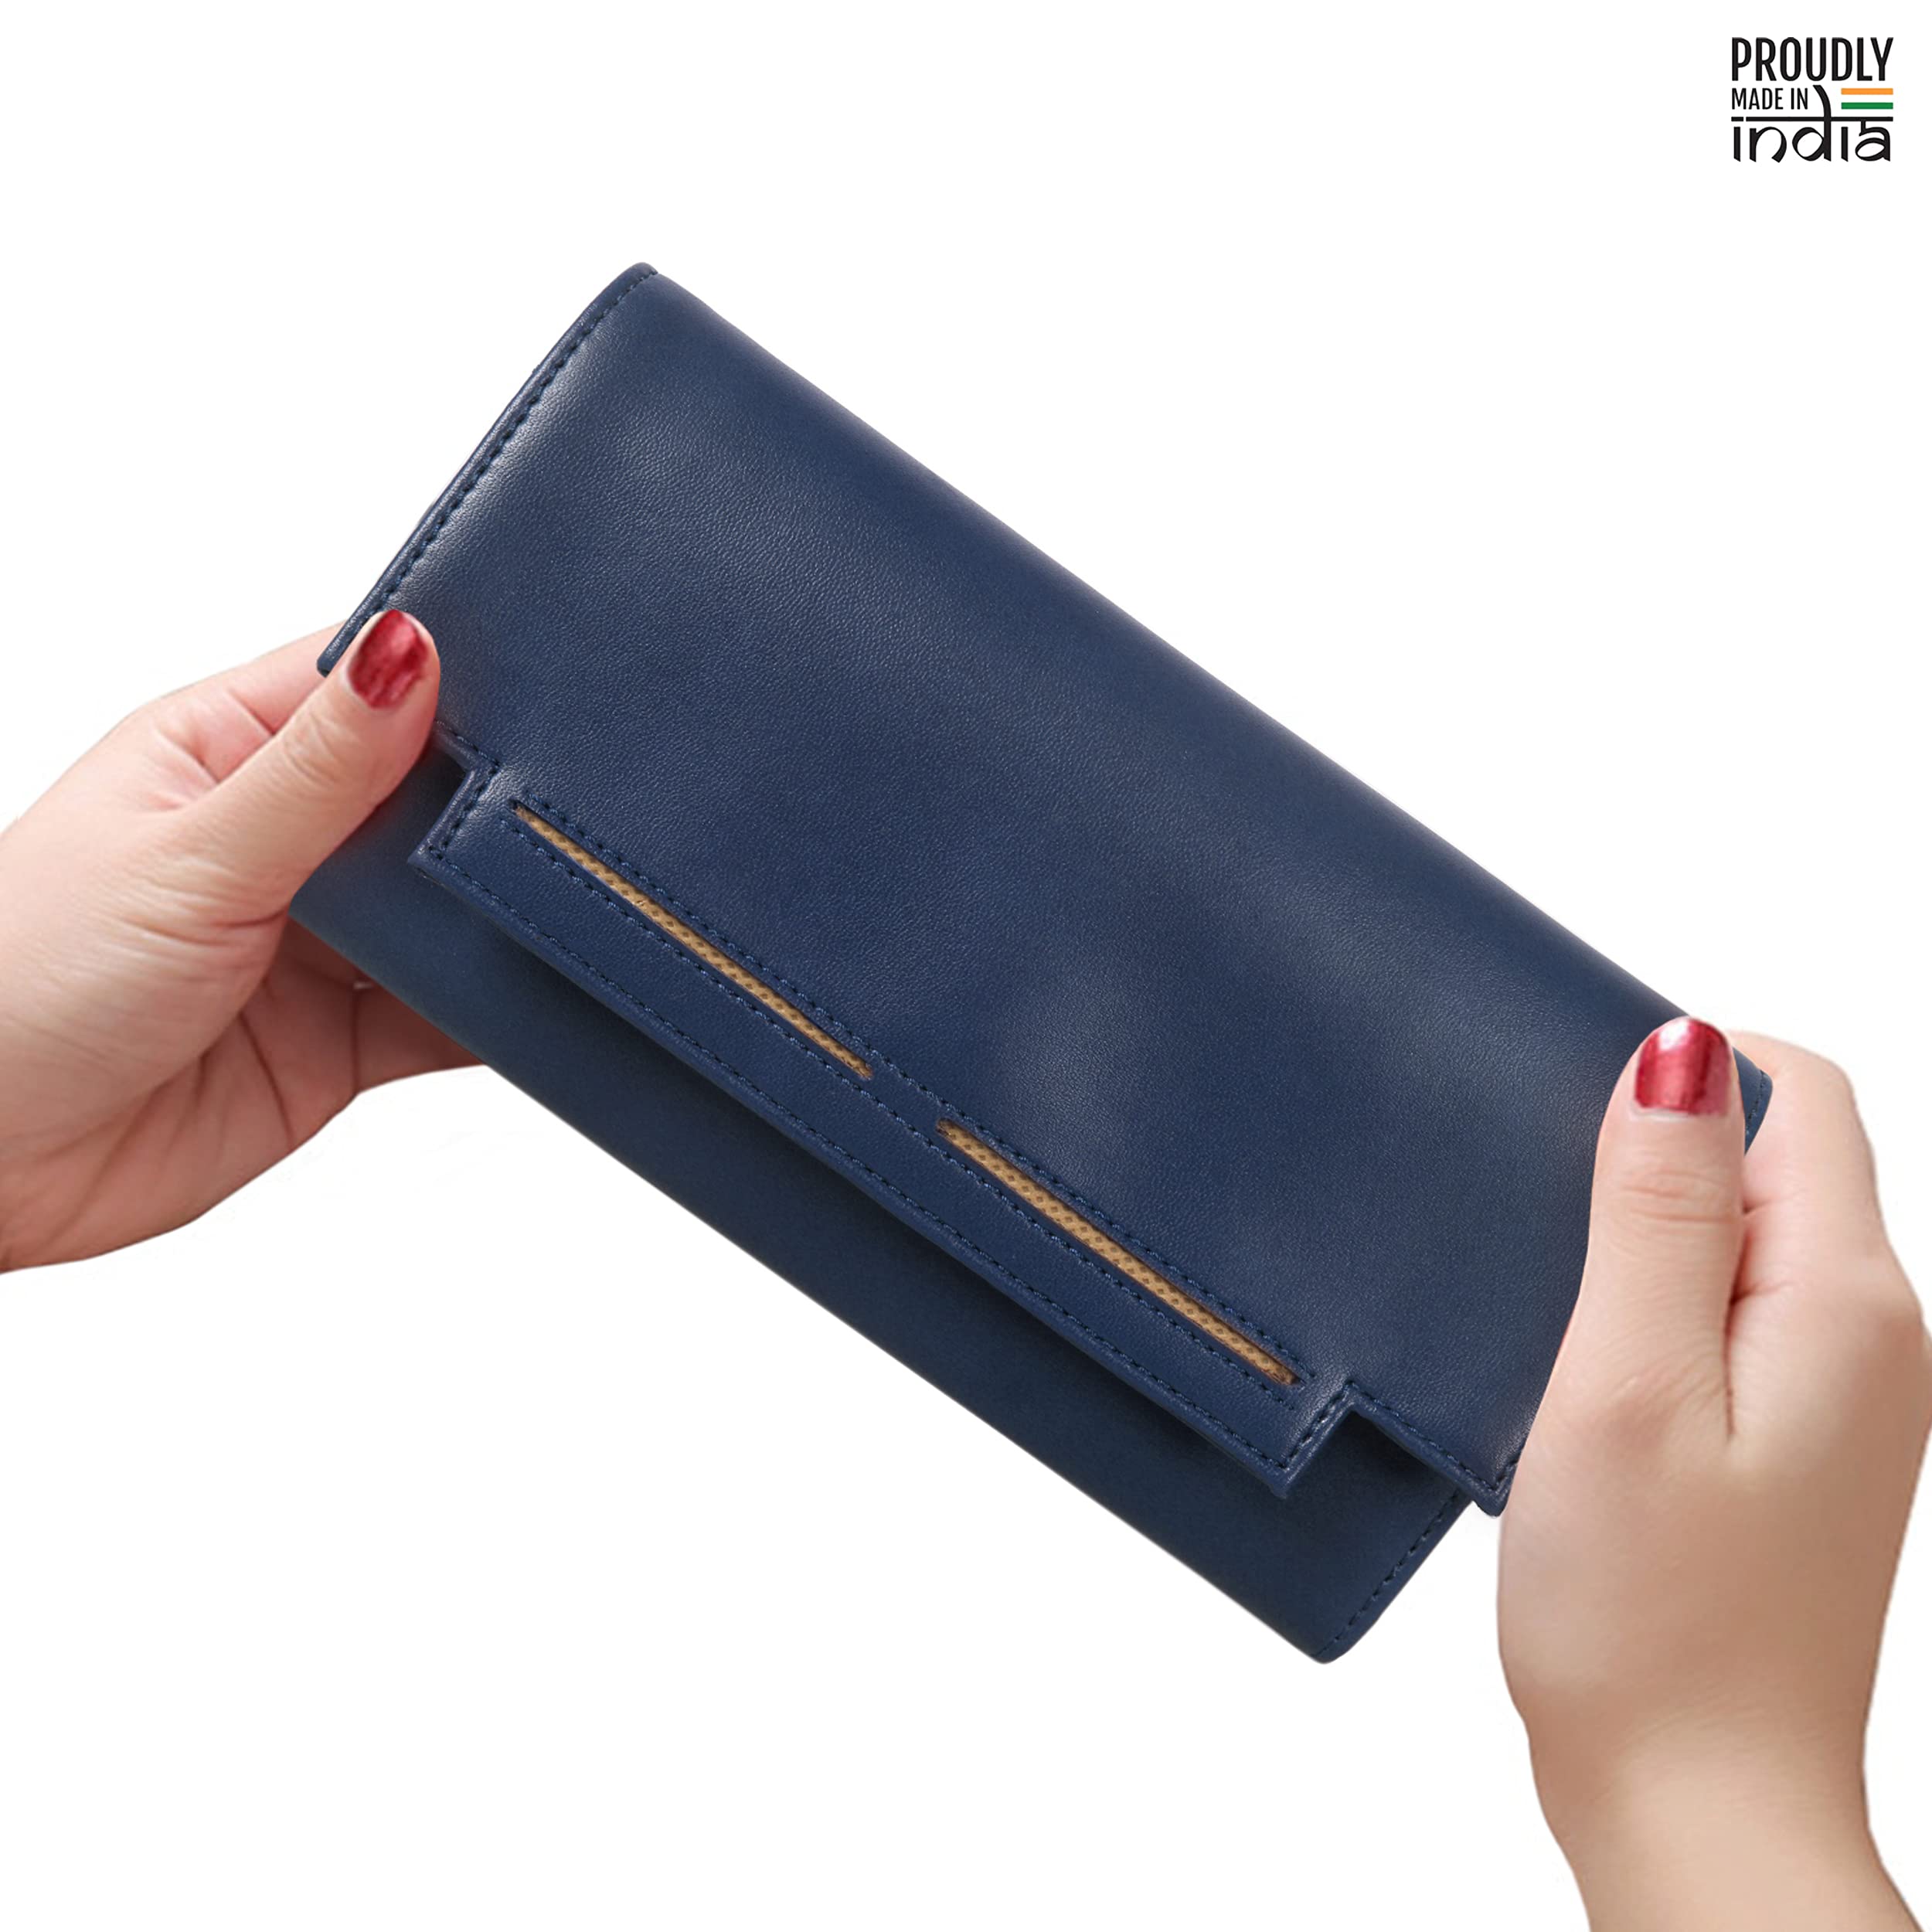 The Clownfish Laura Collection Womens Wallet Clutch Ladies Purse with Multiple Card Slots (Navy Blue)